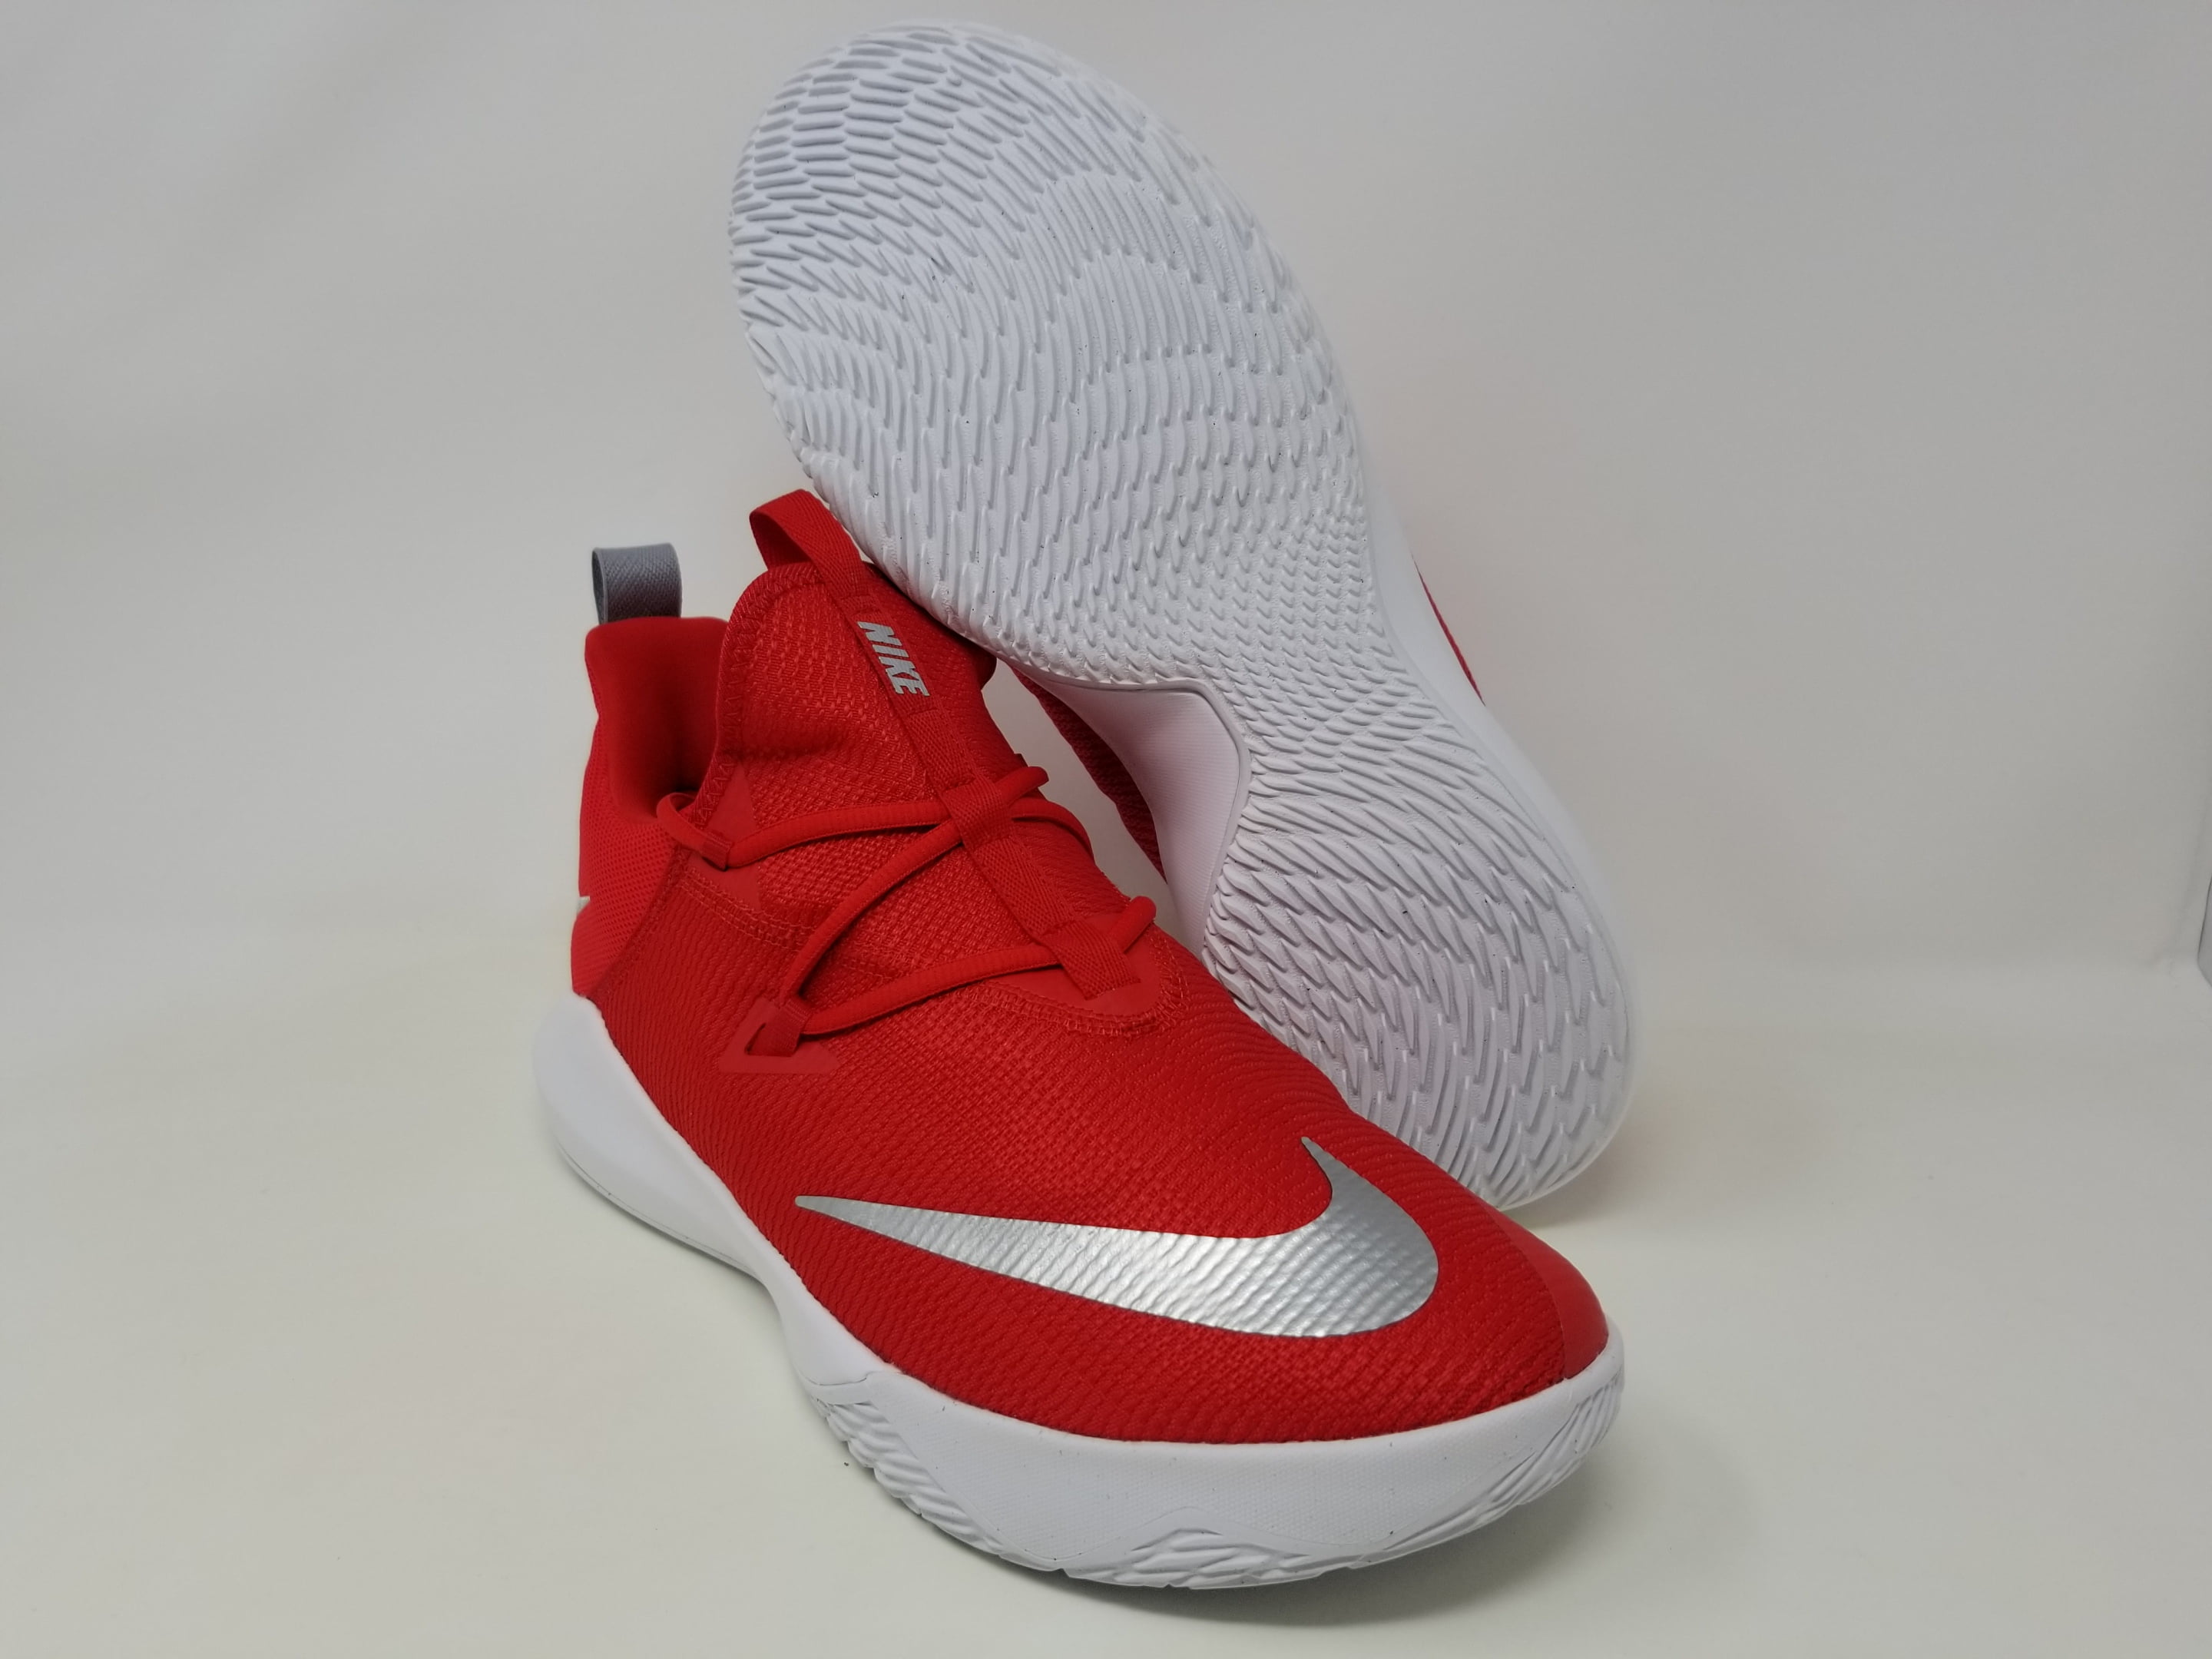 Nike Men's Zoom 2 Basketball Shoes, Red/Silver, 11.5 D(M) US Walmart.com